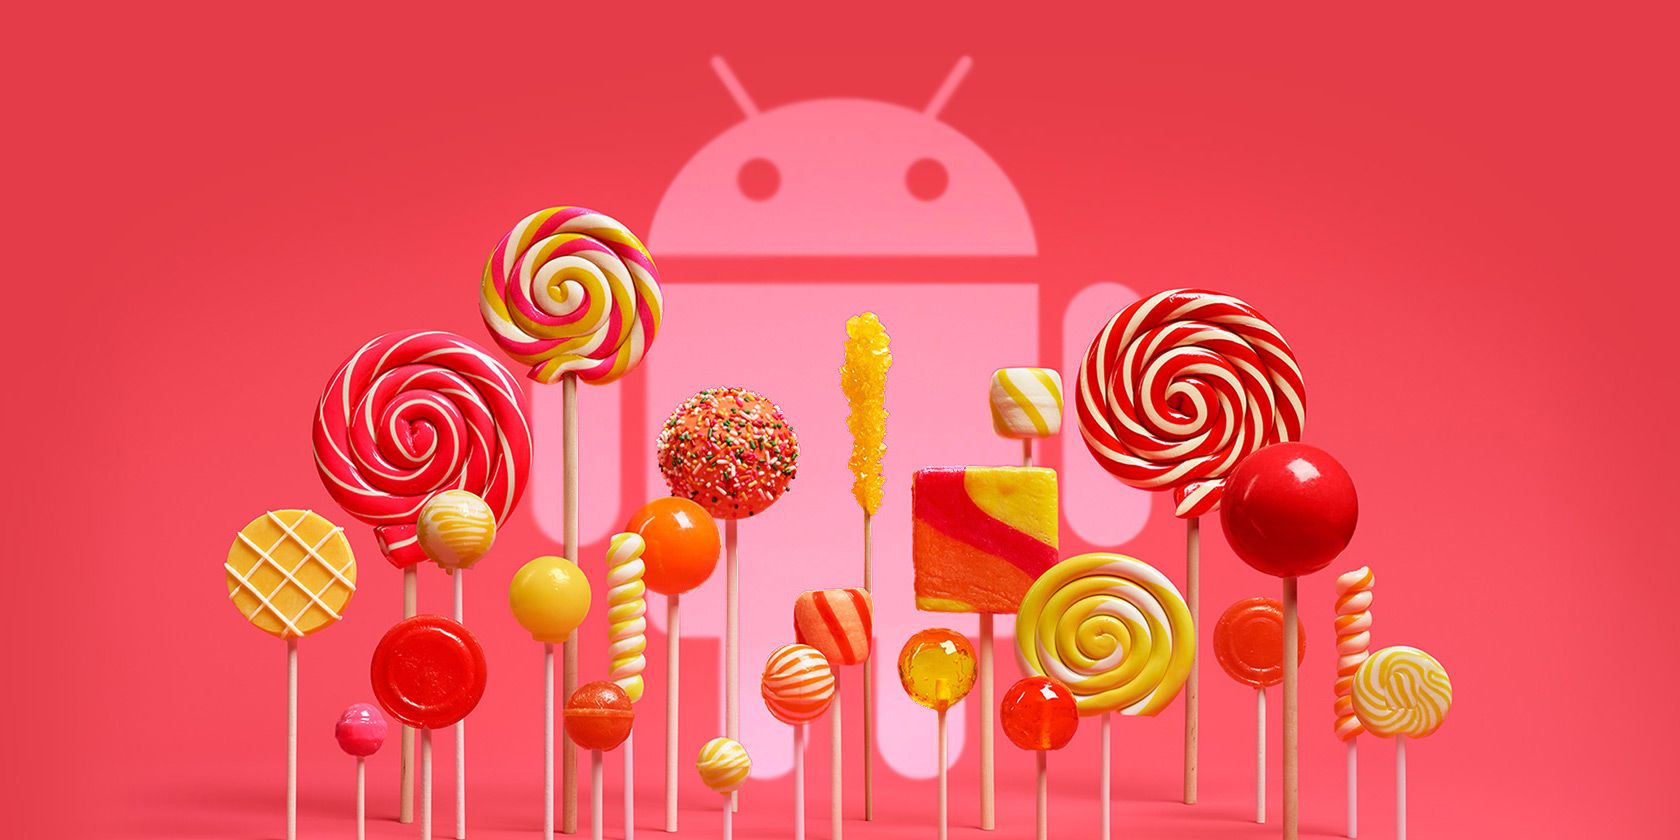 android-lollipop